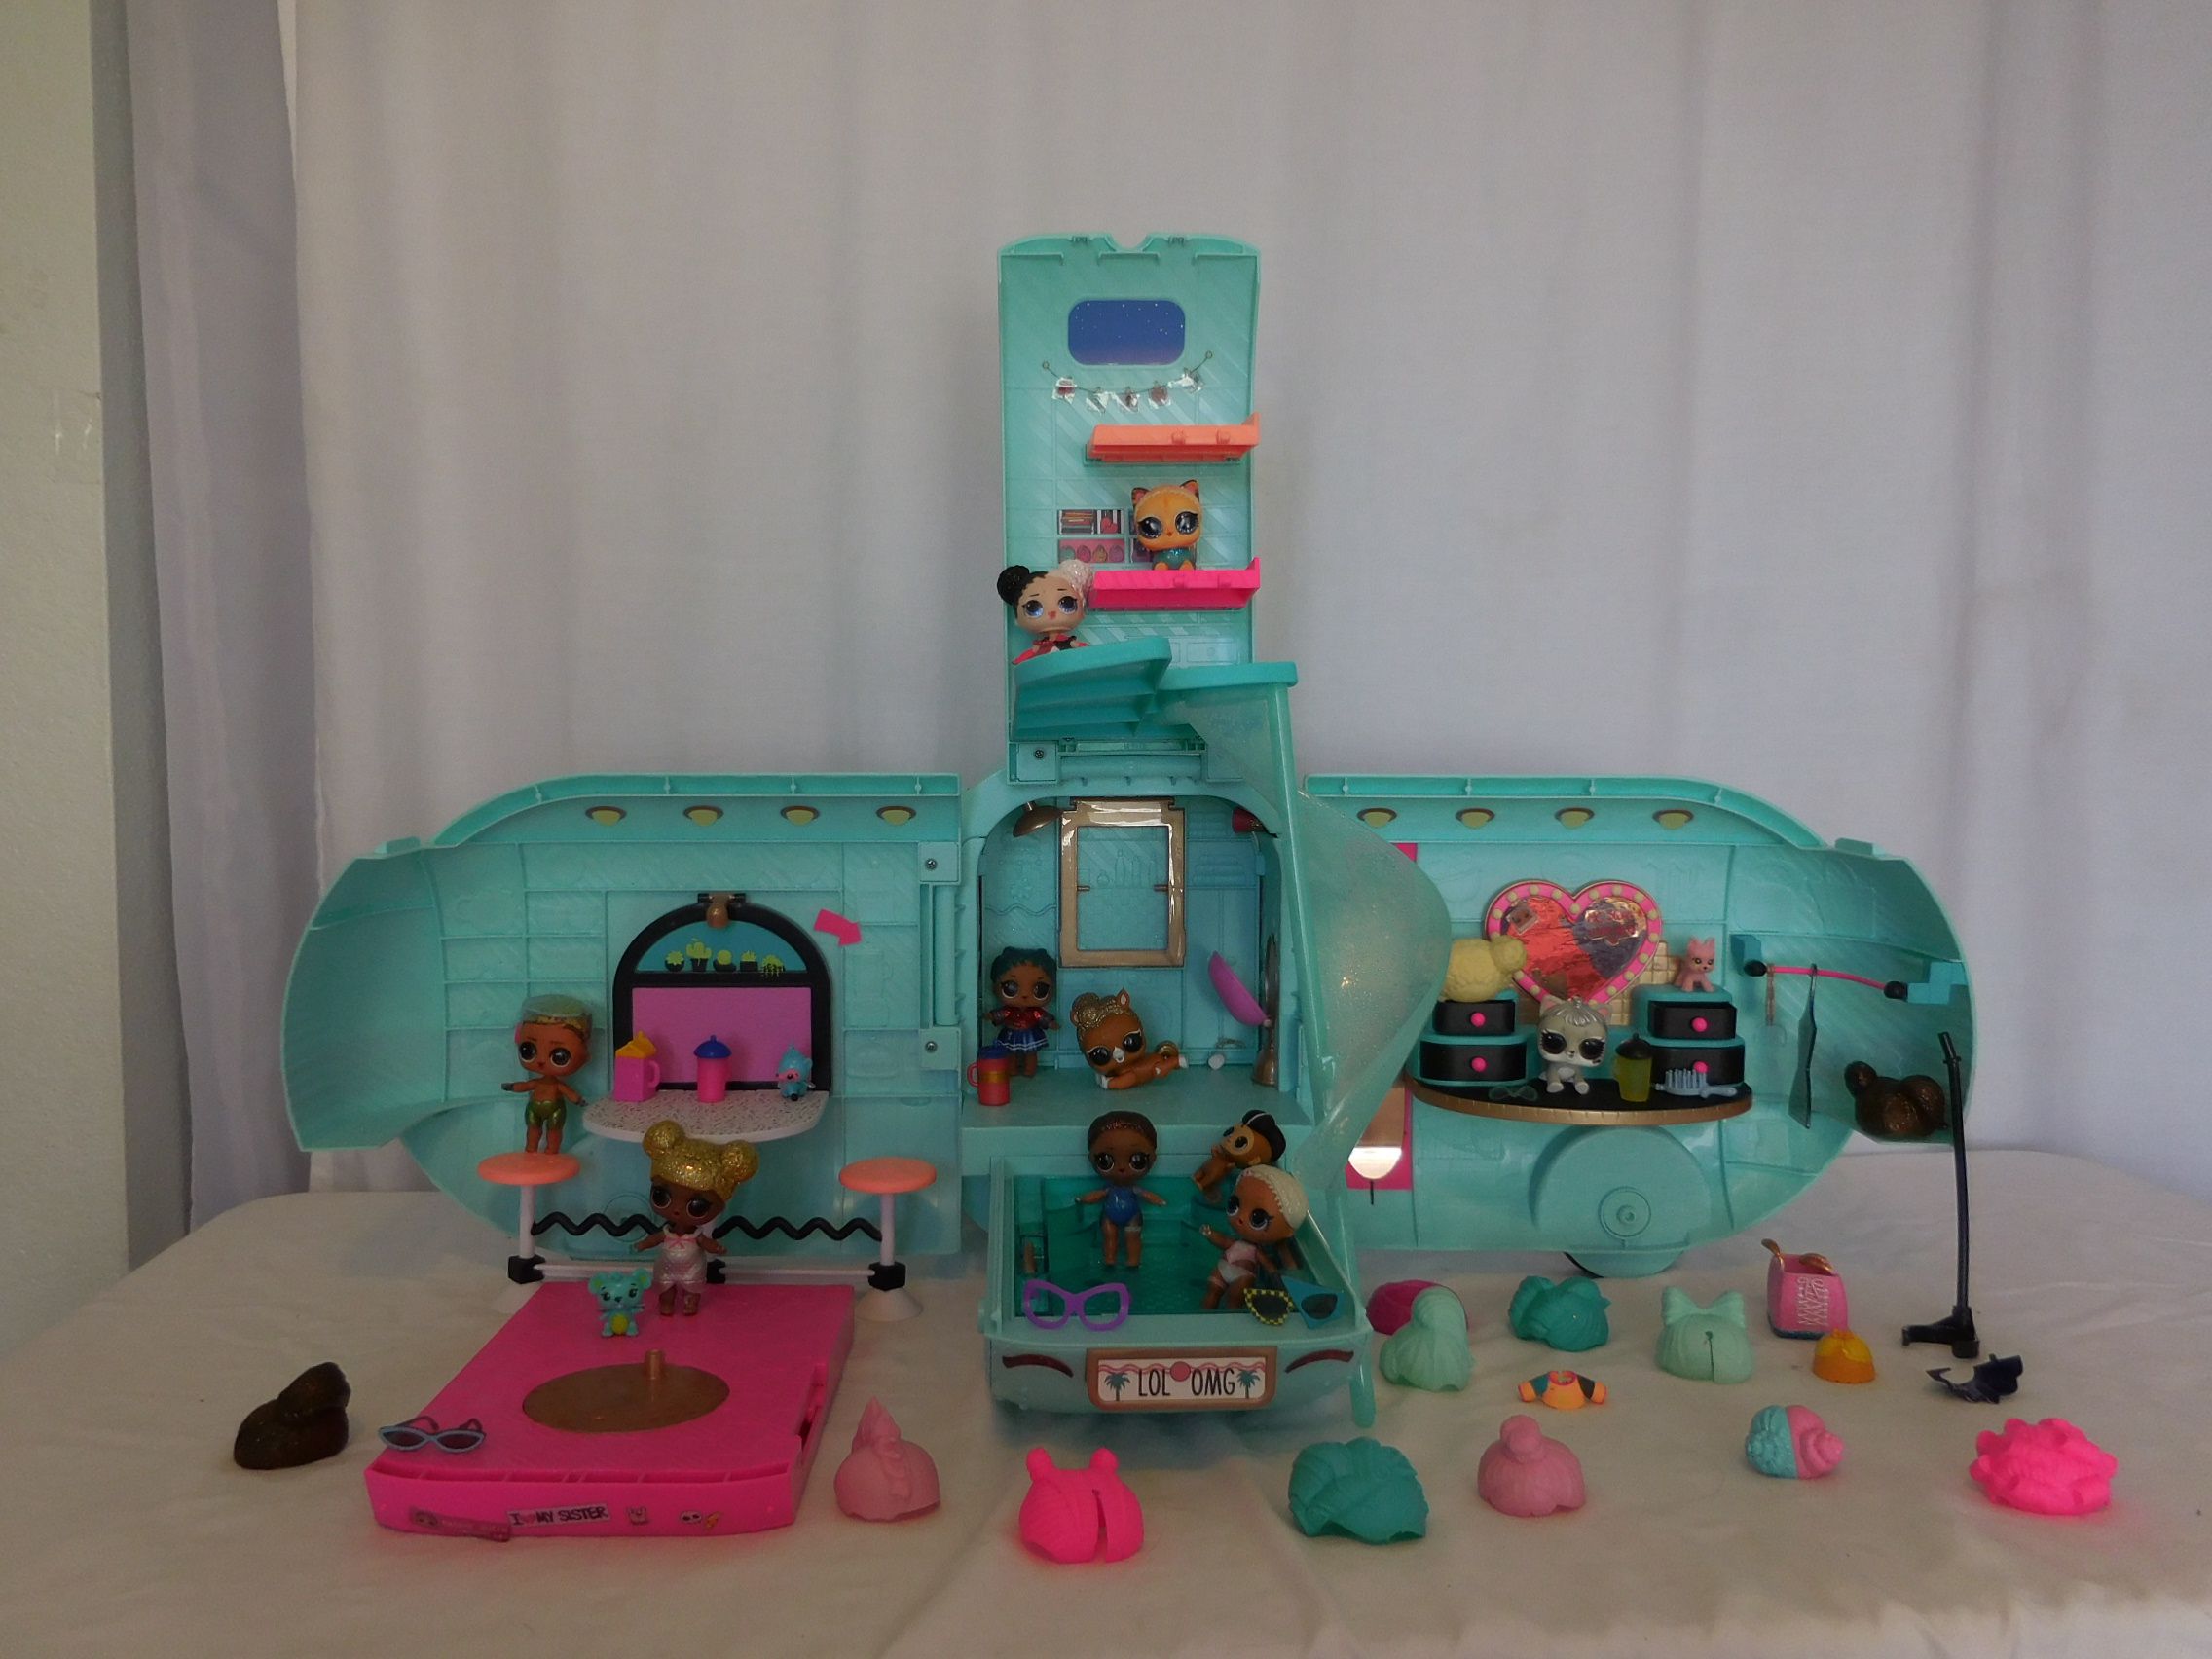 LOL Surprise 2 in 1 Glamper Fashion Camper With Accessories + Dolls, lights sounds work needs 6 AAA battery's